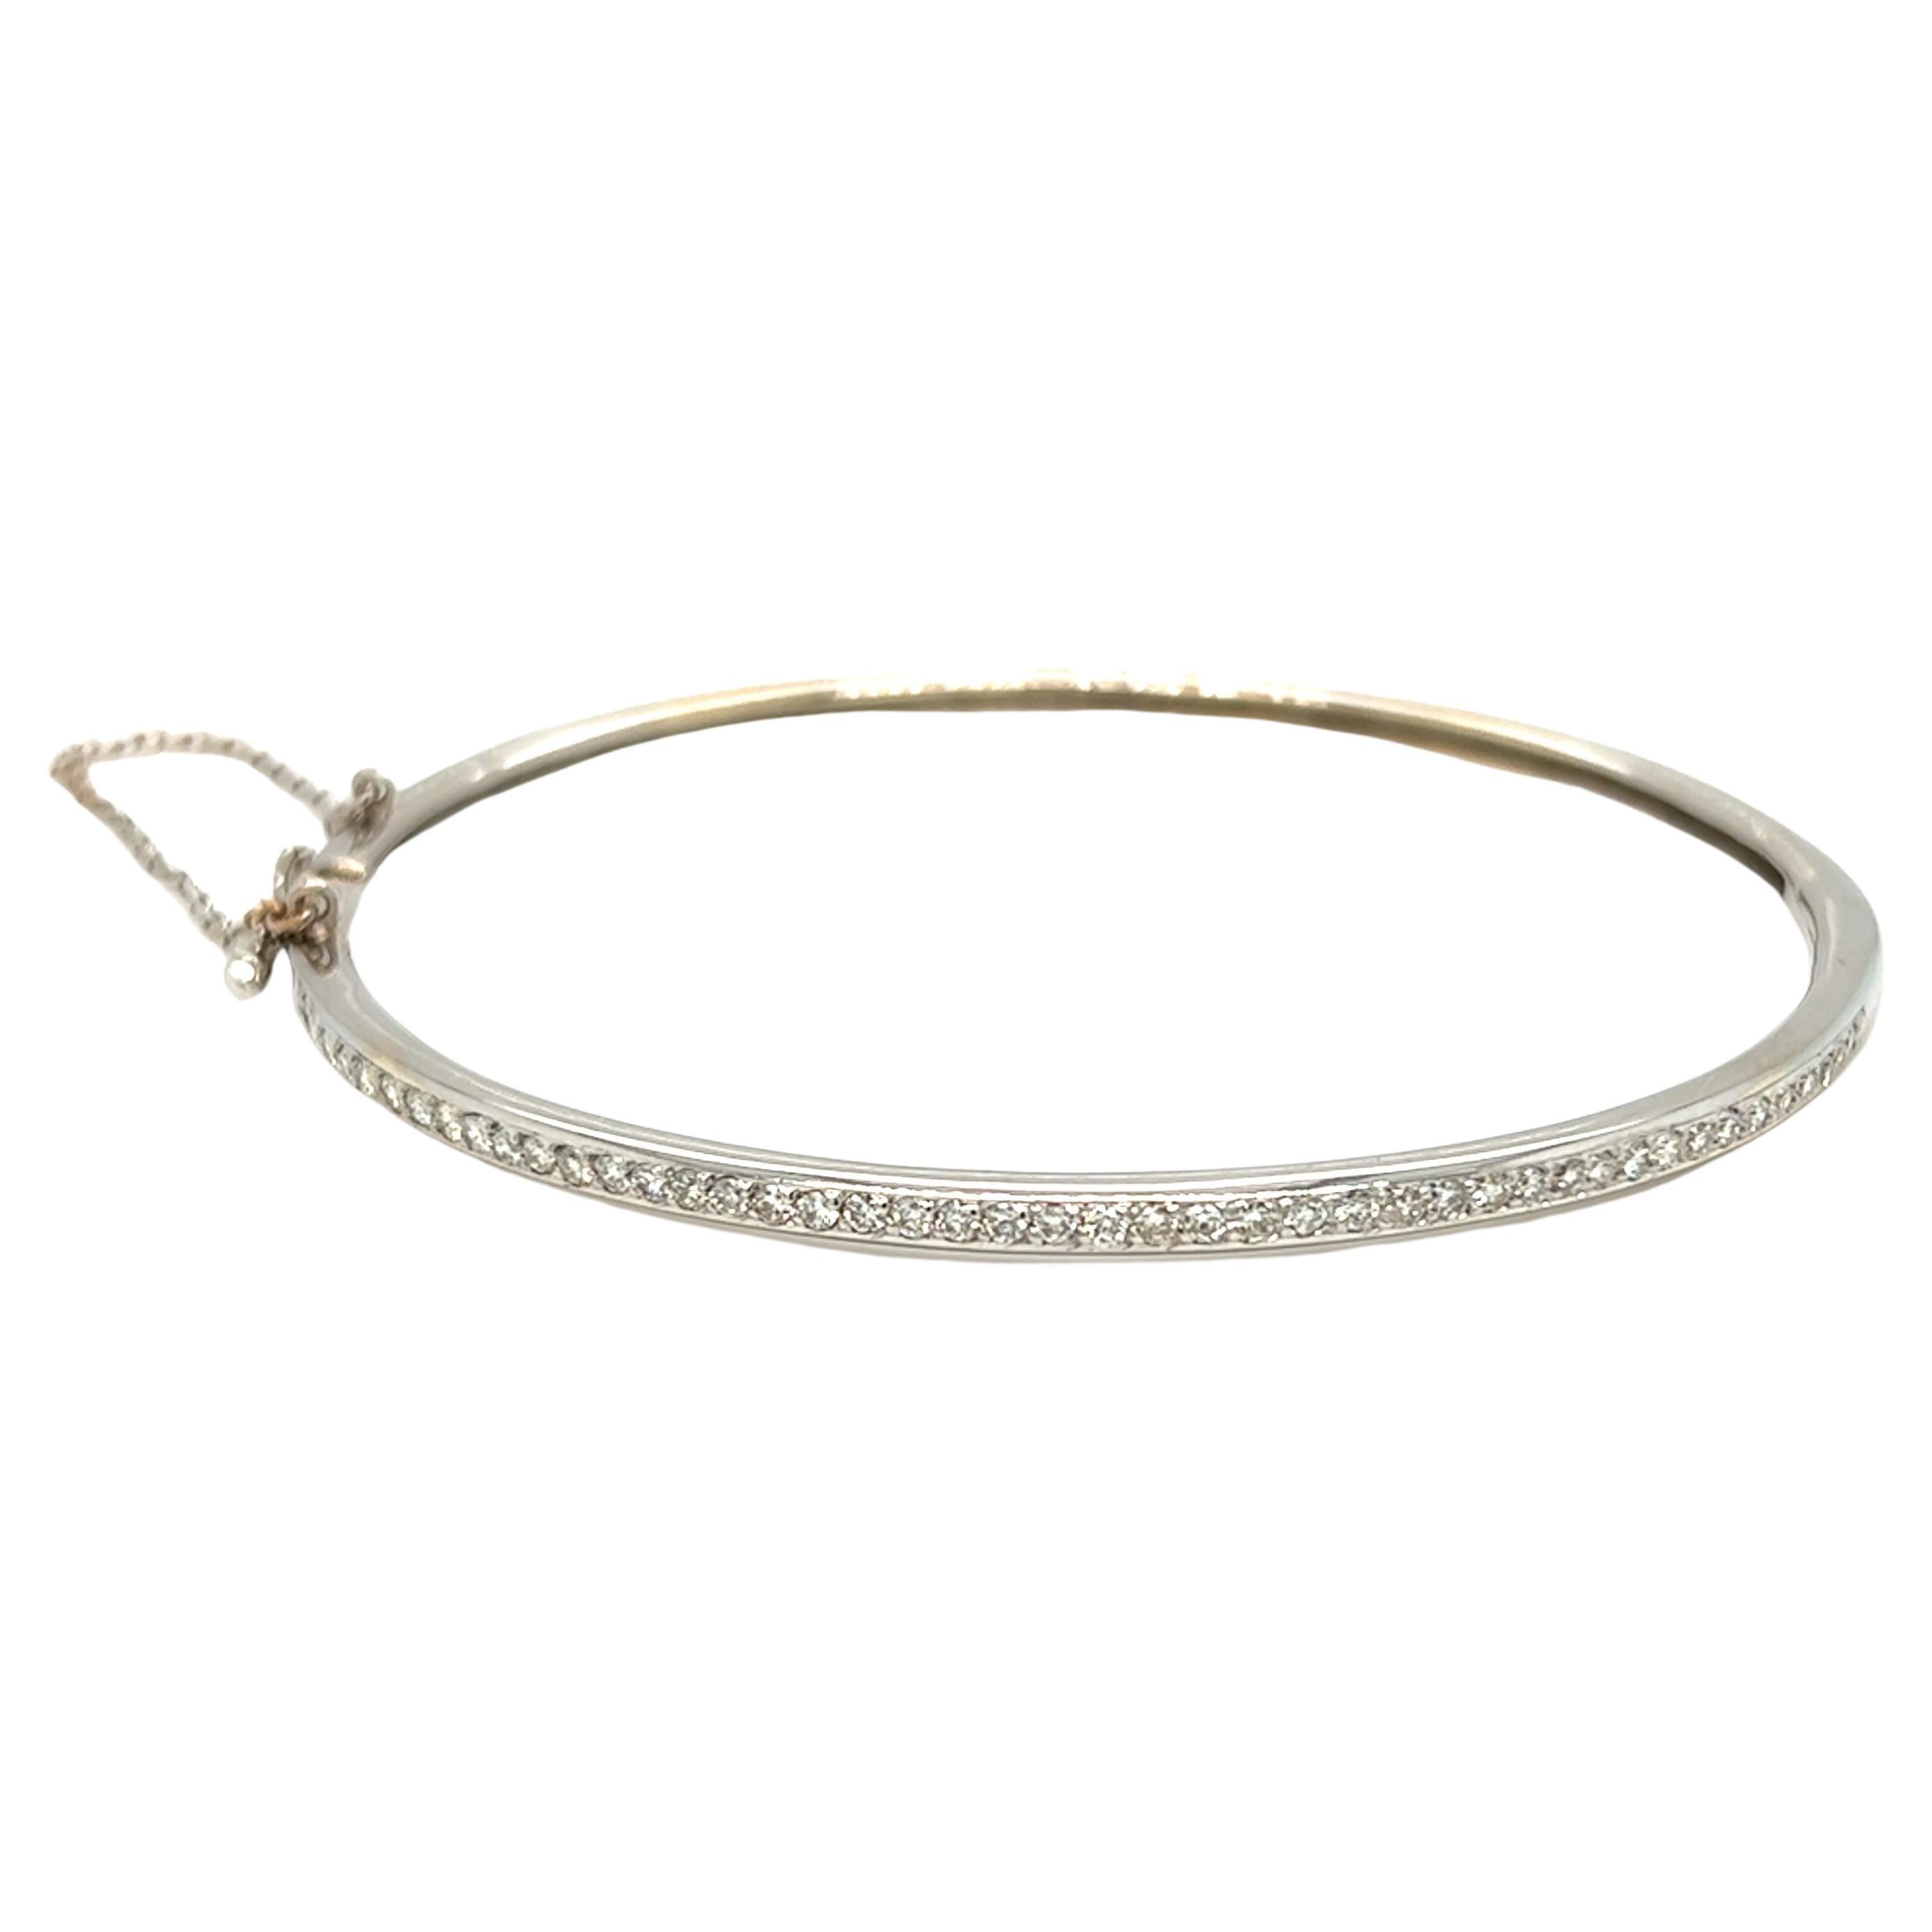 Diamond Bracelet Bangle with Security Chain 14k White Gold For Sale